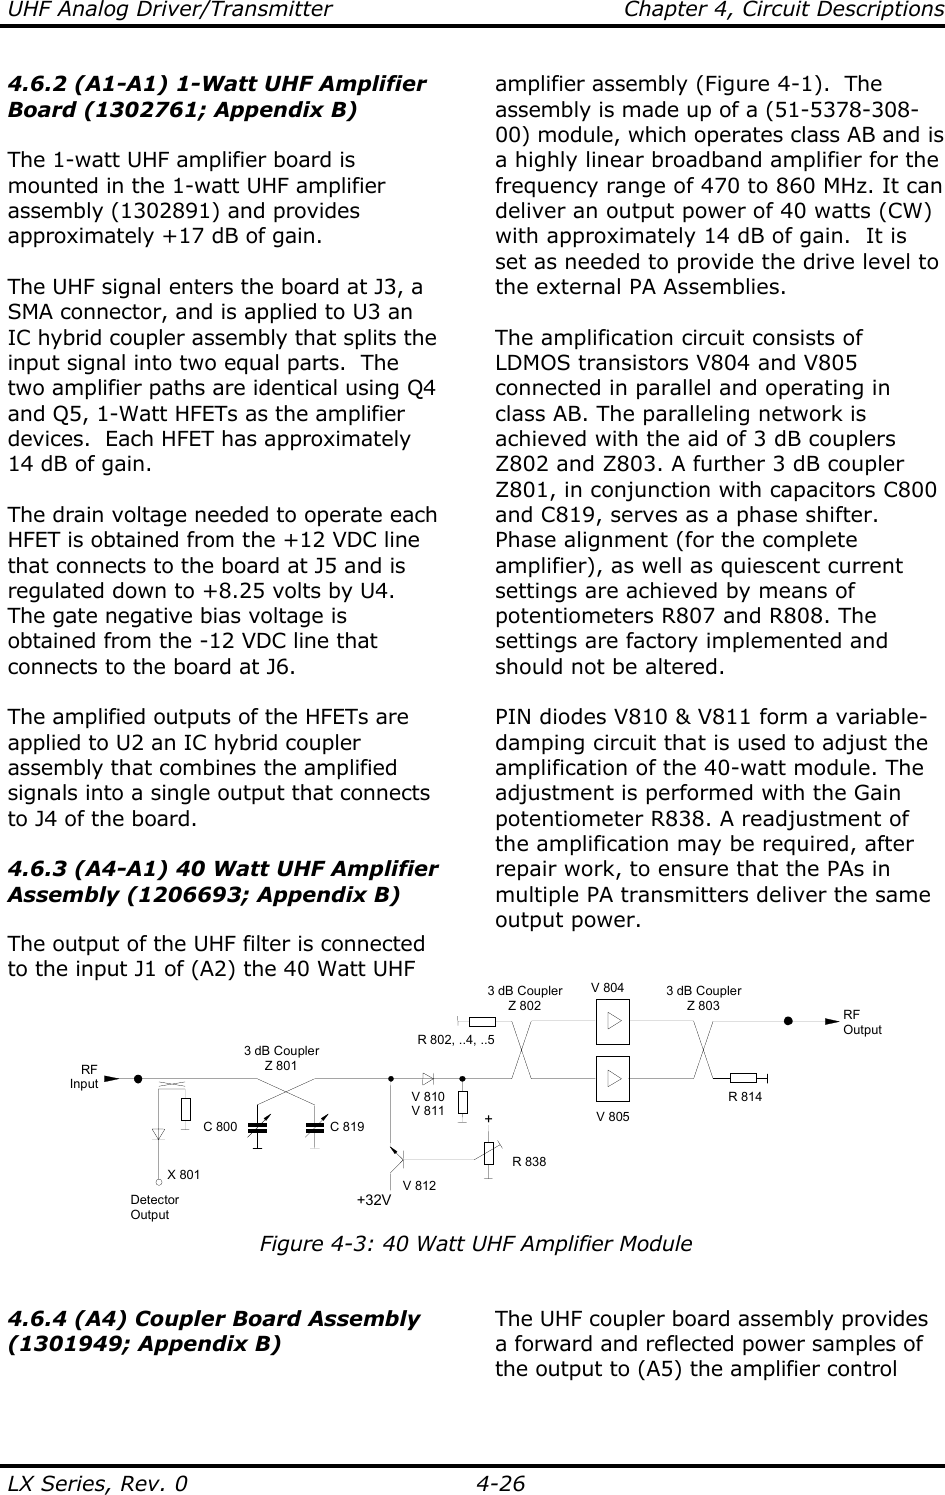 UHF Analog Driver/Transmitter    Chapter 4, Circuit Descriptions LX Series, Rev. 0    4-26 4.6.2 (A1-A1) 1-Watt UHF Amplifier Board (1302761; Appendix B)  The 1-watt UHF amplifier board is mounted in the 1-watt UHF amplifier assembly (1302891) and provides approximately +17 dB of gain.  The UHF signal enters the board at J3, a SMA connector, and is applied to U3 an IC hybrid coupler assembly that splits the input signal into two equal parts.  The two amplifier paths are identical using Q4 and Q5, 1-Watt HFETs as the amplifier devices.  Each HFET has approximately 14 dB of gain.    The drain voltage needed to operate each HFET is obtained from the +12 VDC line that connects to the board at J5 and is regulated down to +8.25 volts by U4.  The gate negative bias voltage is obtained from the -12 VDC line that connects to the board at J6.  The amplified outputs of the HFETs are applied to U2 an IC hybrid coupler assembly that combines the amplified signals into a single output that connects to J4 of the board.  4.6.3 (A4-A1) 40 Watt UHF Amplifier Assembly (1206693; Appendix B)  The output of the UHF filter is connected to the input J1 of (A2) the 40 Watt UHF amplifier assembly (Figure 4-1).  The assembly is made up of a (51-5378-308-00) module, which operates class AB and is a highly linear broadband amplifier for the frequency range of 470 to 860 MHz. It can deliver an output power of 40 watts (CW) with approximately 14 dB of gain.  It is set as needed to provide the drive level to the external PA Assemblies.  The amplification circuit consists of LDMOS transistors V804 and V805 connected in parallel and operating in class AB. The paralleling network is achieved with the aid of 3 dB couplers Z802 and Z803. A further 3 dB coupler Z801, in conjunction with capacitors C800 and C819, serves as a phase shifter. Phase alignment (for the complete amplifier), as well as quiescent current settings are achieved by means of potentiometers R807 and R808. The settings are factory implemented and should not be altered.  PIN diodes V810 &amp; V811 form a variable-damping circuit that is used to adjust the amplification of the 40-watt module. The adjustment is performed with the Gain potentiometer R838. A readjustment of the amplification may be required, after repair work, to ensure that the PAs in multiple PA transmitters deliver the same output power. V 805V 8043 dB CouplerZ 801RFOutputRFInputR 814R 802, ..4, ..5C 800 C 819DetectorOutputX 801+32V+R 838V 810V 811V 8123 dB CouplerZ 8023 dB CouplerZ 803 Figure 4-3: 40 Watt UHF Amplifier Module  4.6.4 (A4) Coupler Board Assembly (1301949; Appendix B)  The UHF coupler board assembly provides a forward and reflected power samples of the output to (A5) the amplifier control 